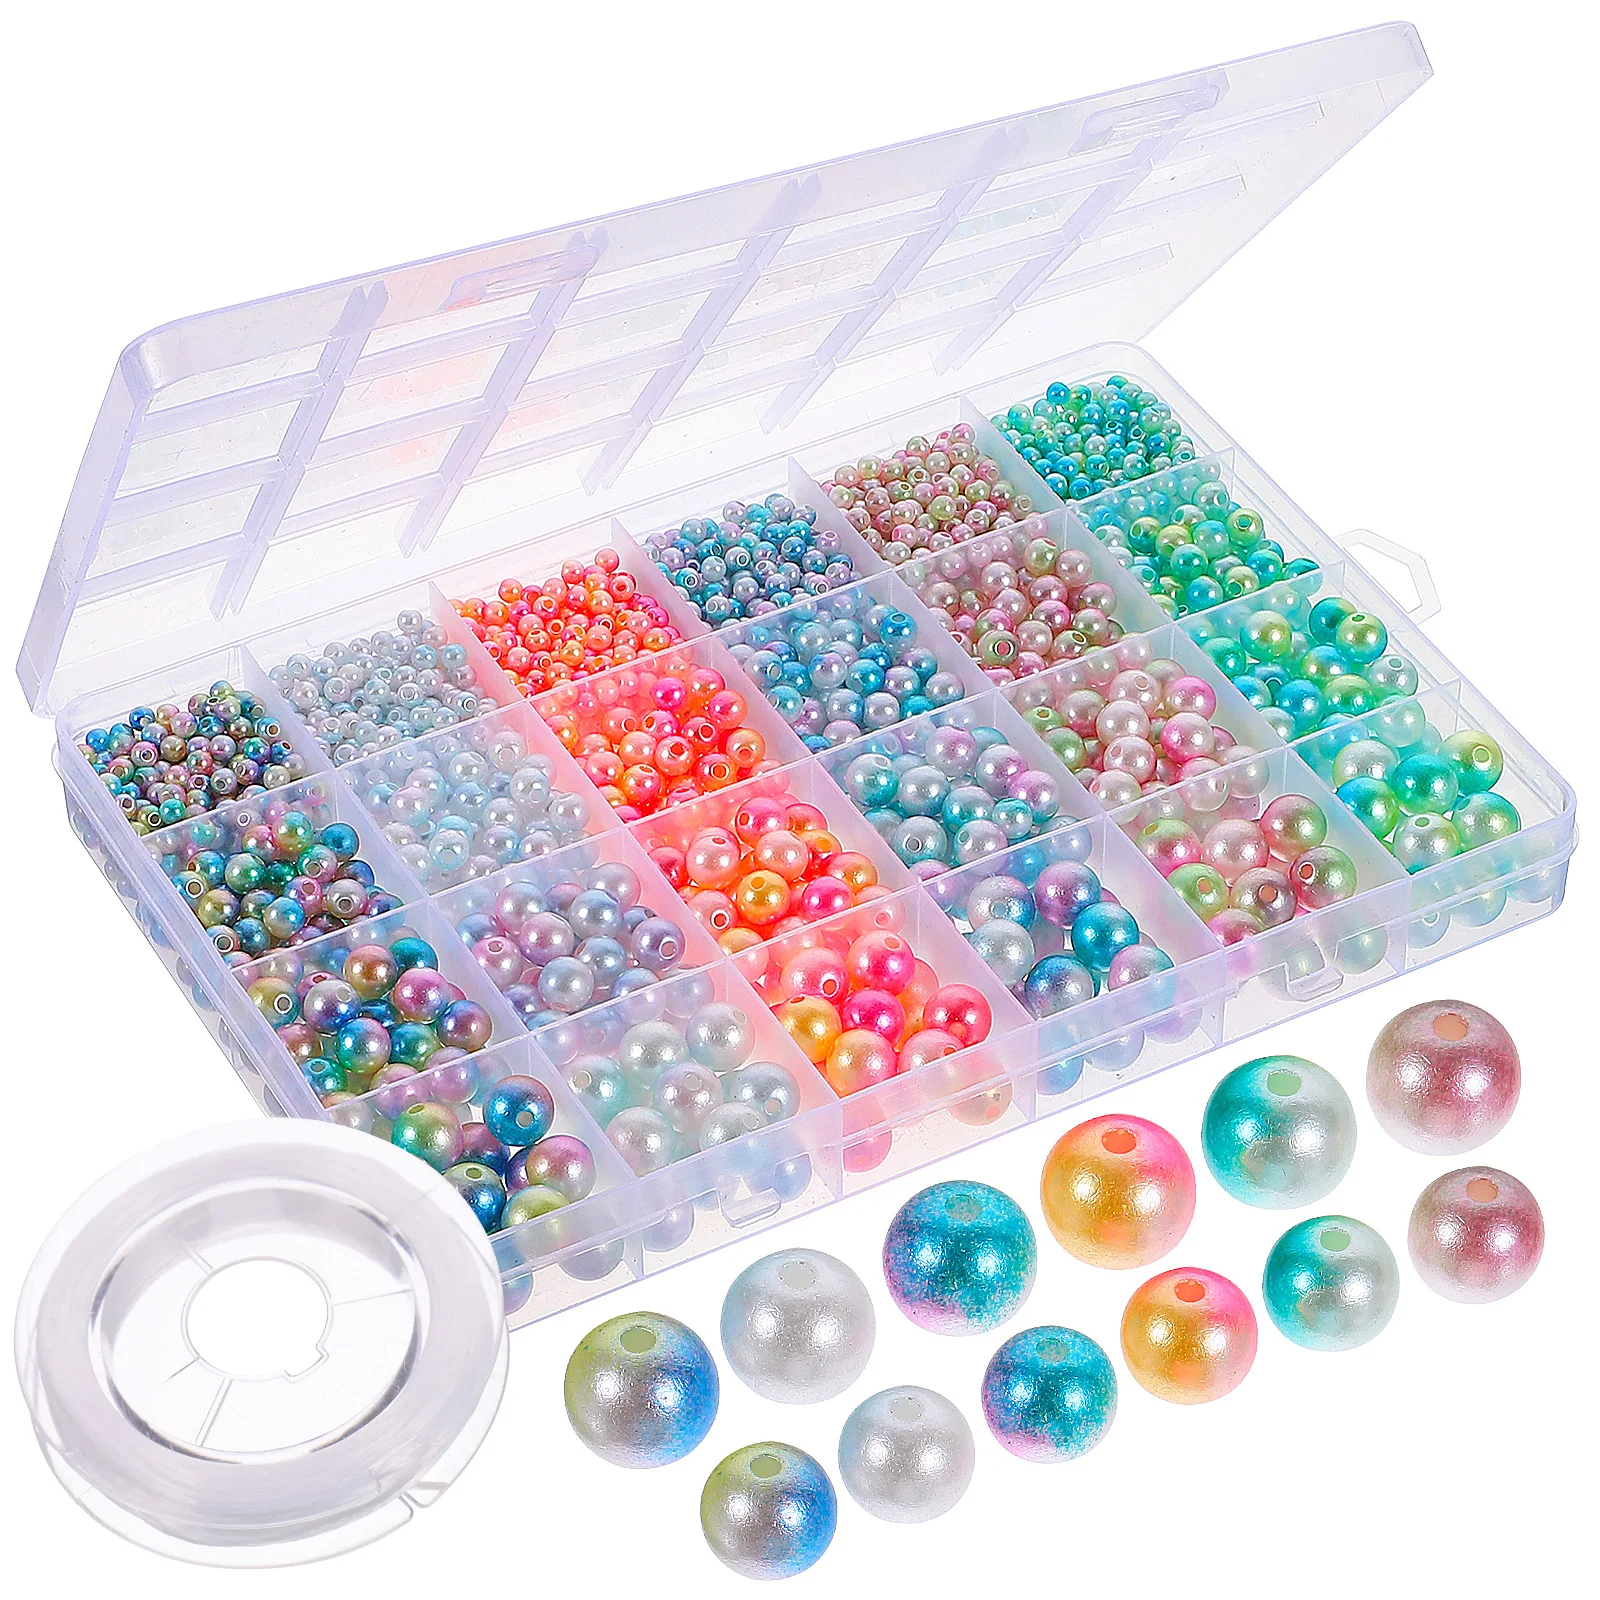 

1890 Pcs Pearl DIY Set Small Beads Holes Loose Round Pearls Crafts Fake Making Scattered Charms